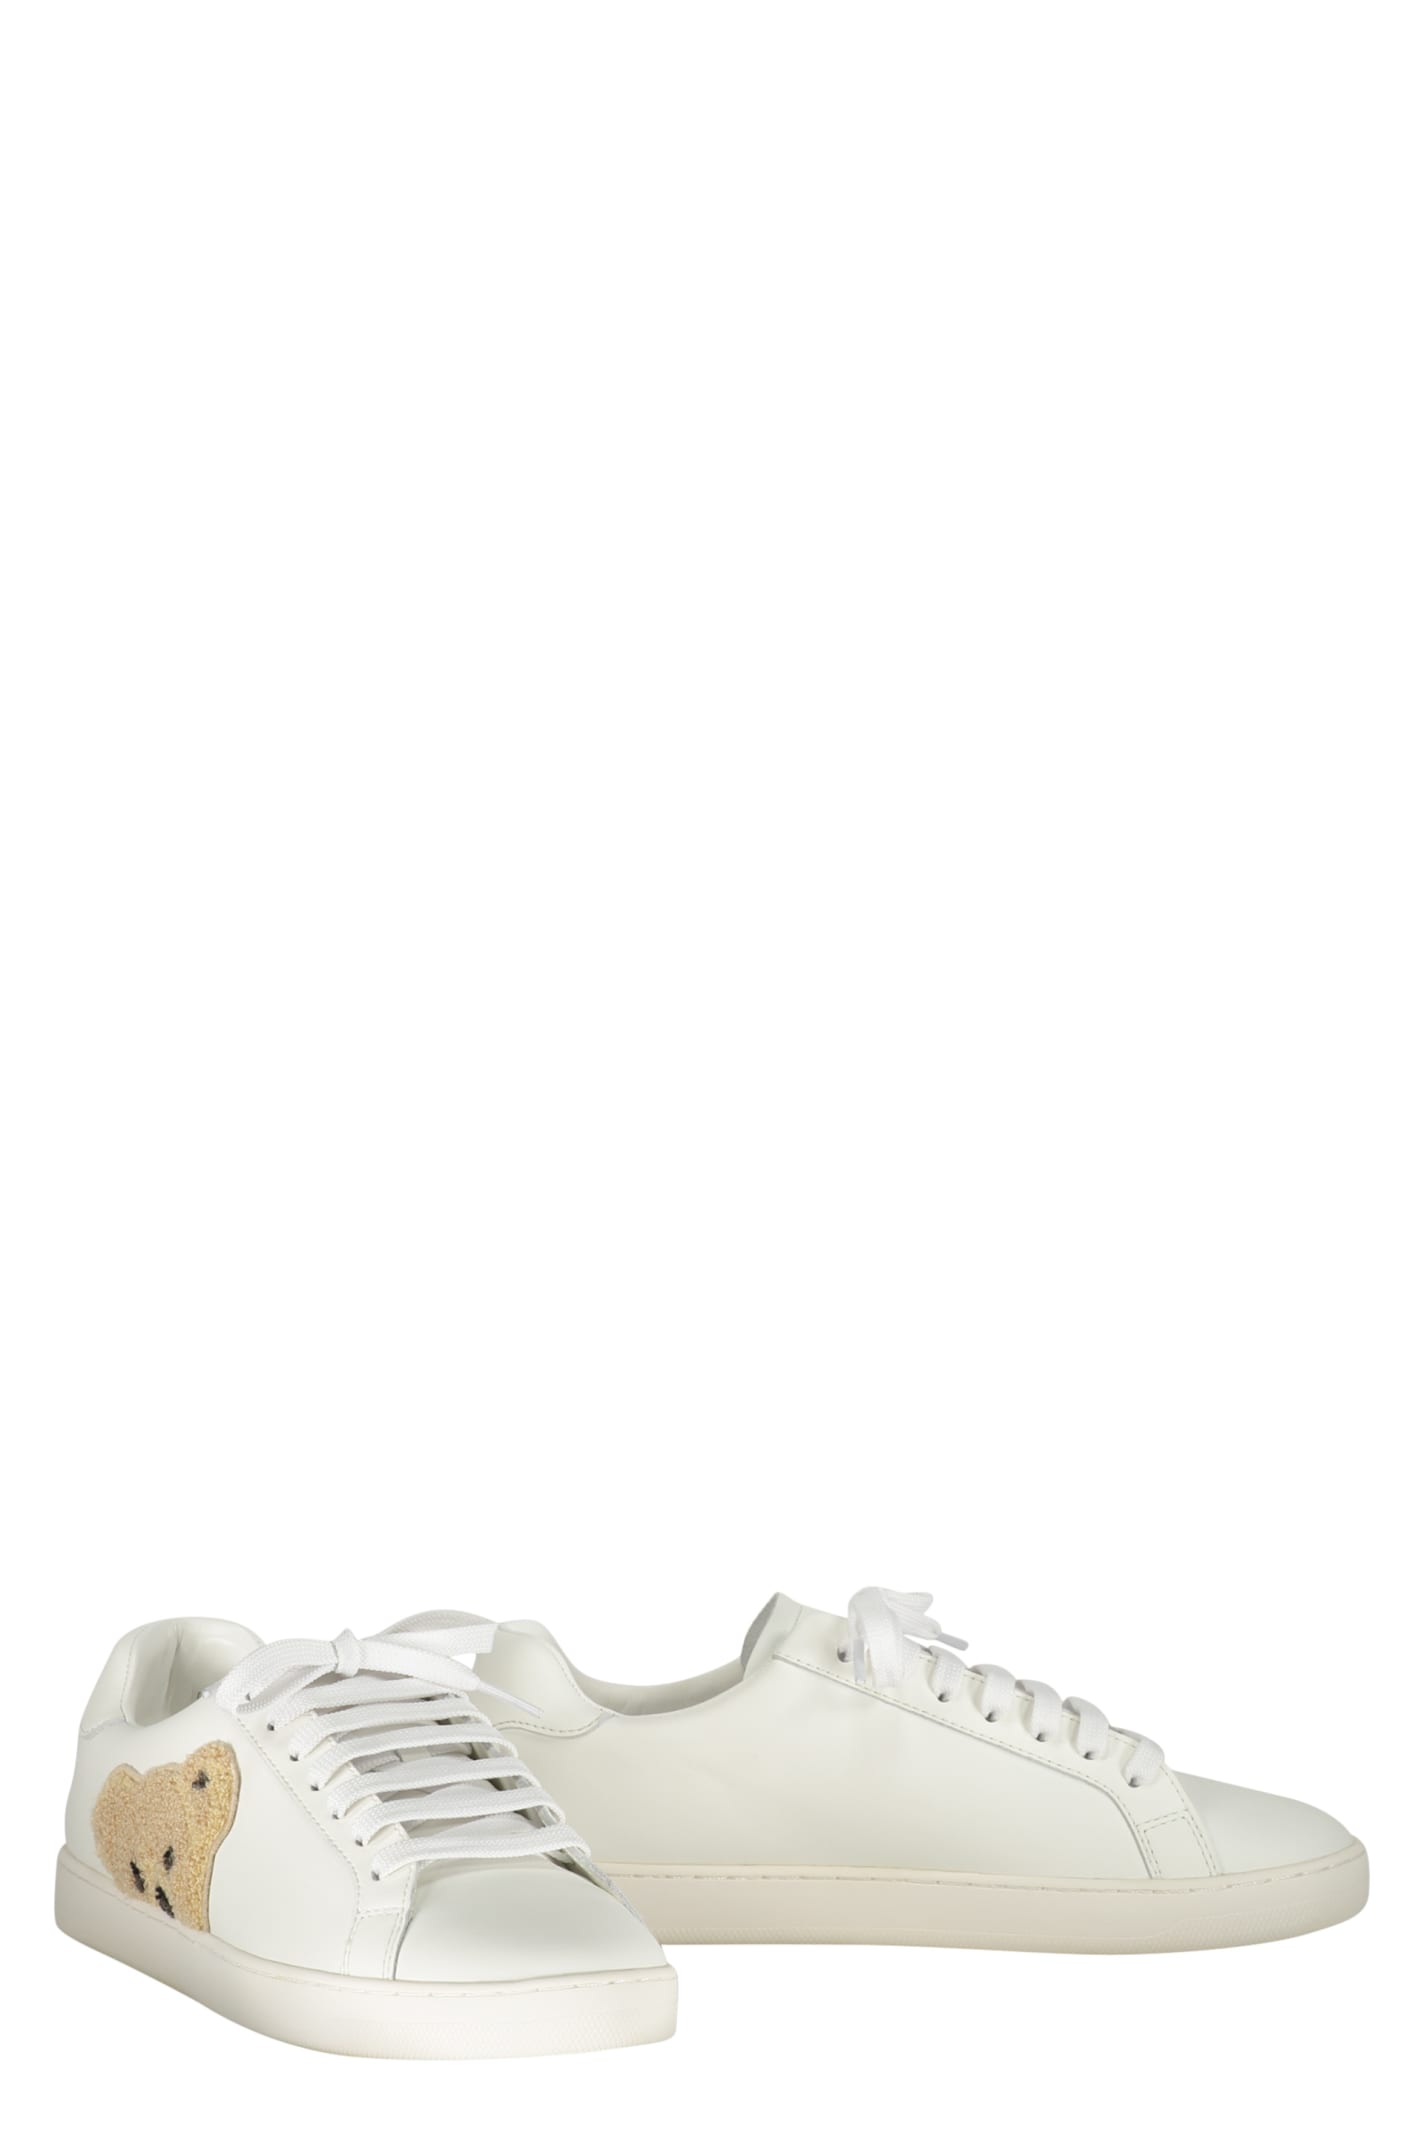 Shop Palm Angels New Teddy Bear Leather Low-top Sneakers In White